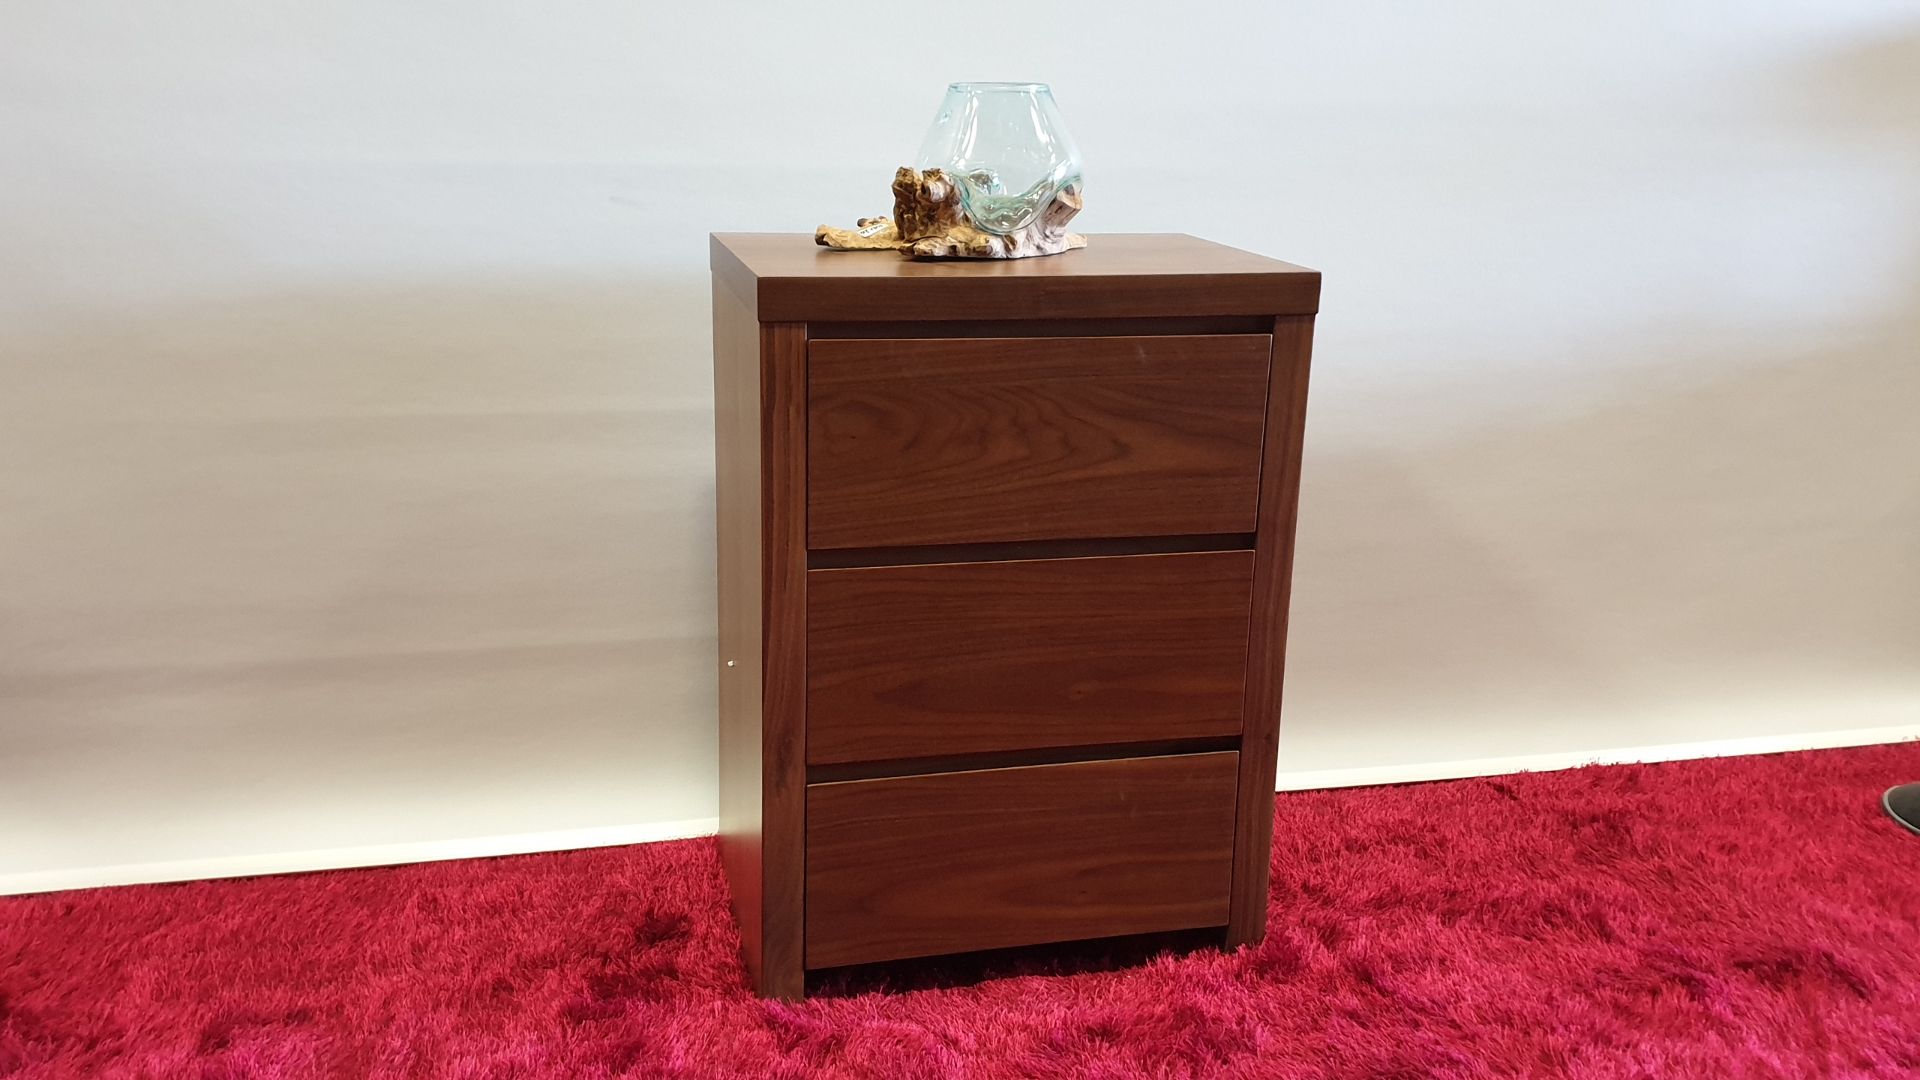 BRAND NEW WOODEN WALNUT COLOUR 3 DRAWER SOFT CLOSE CHEST OF DRAWERS 592 X 396 X 821MM RRP £329